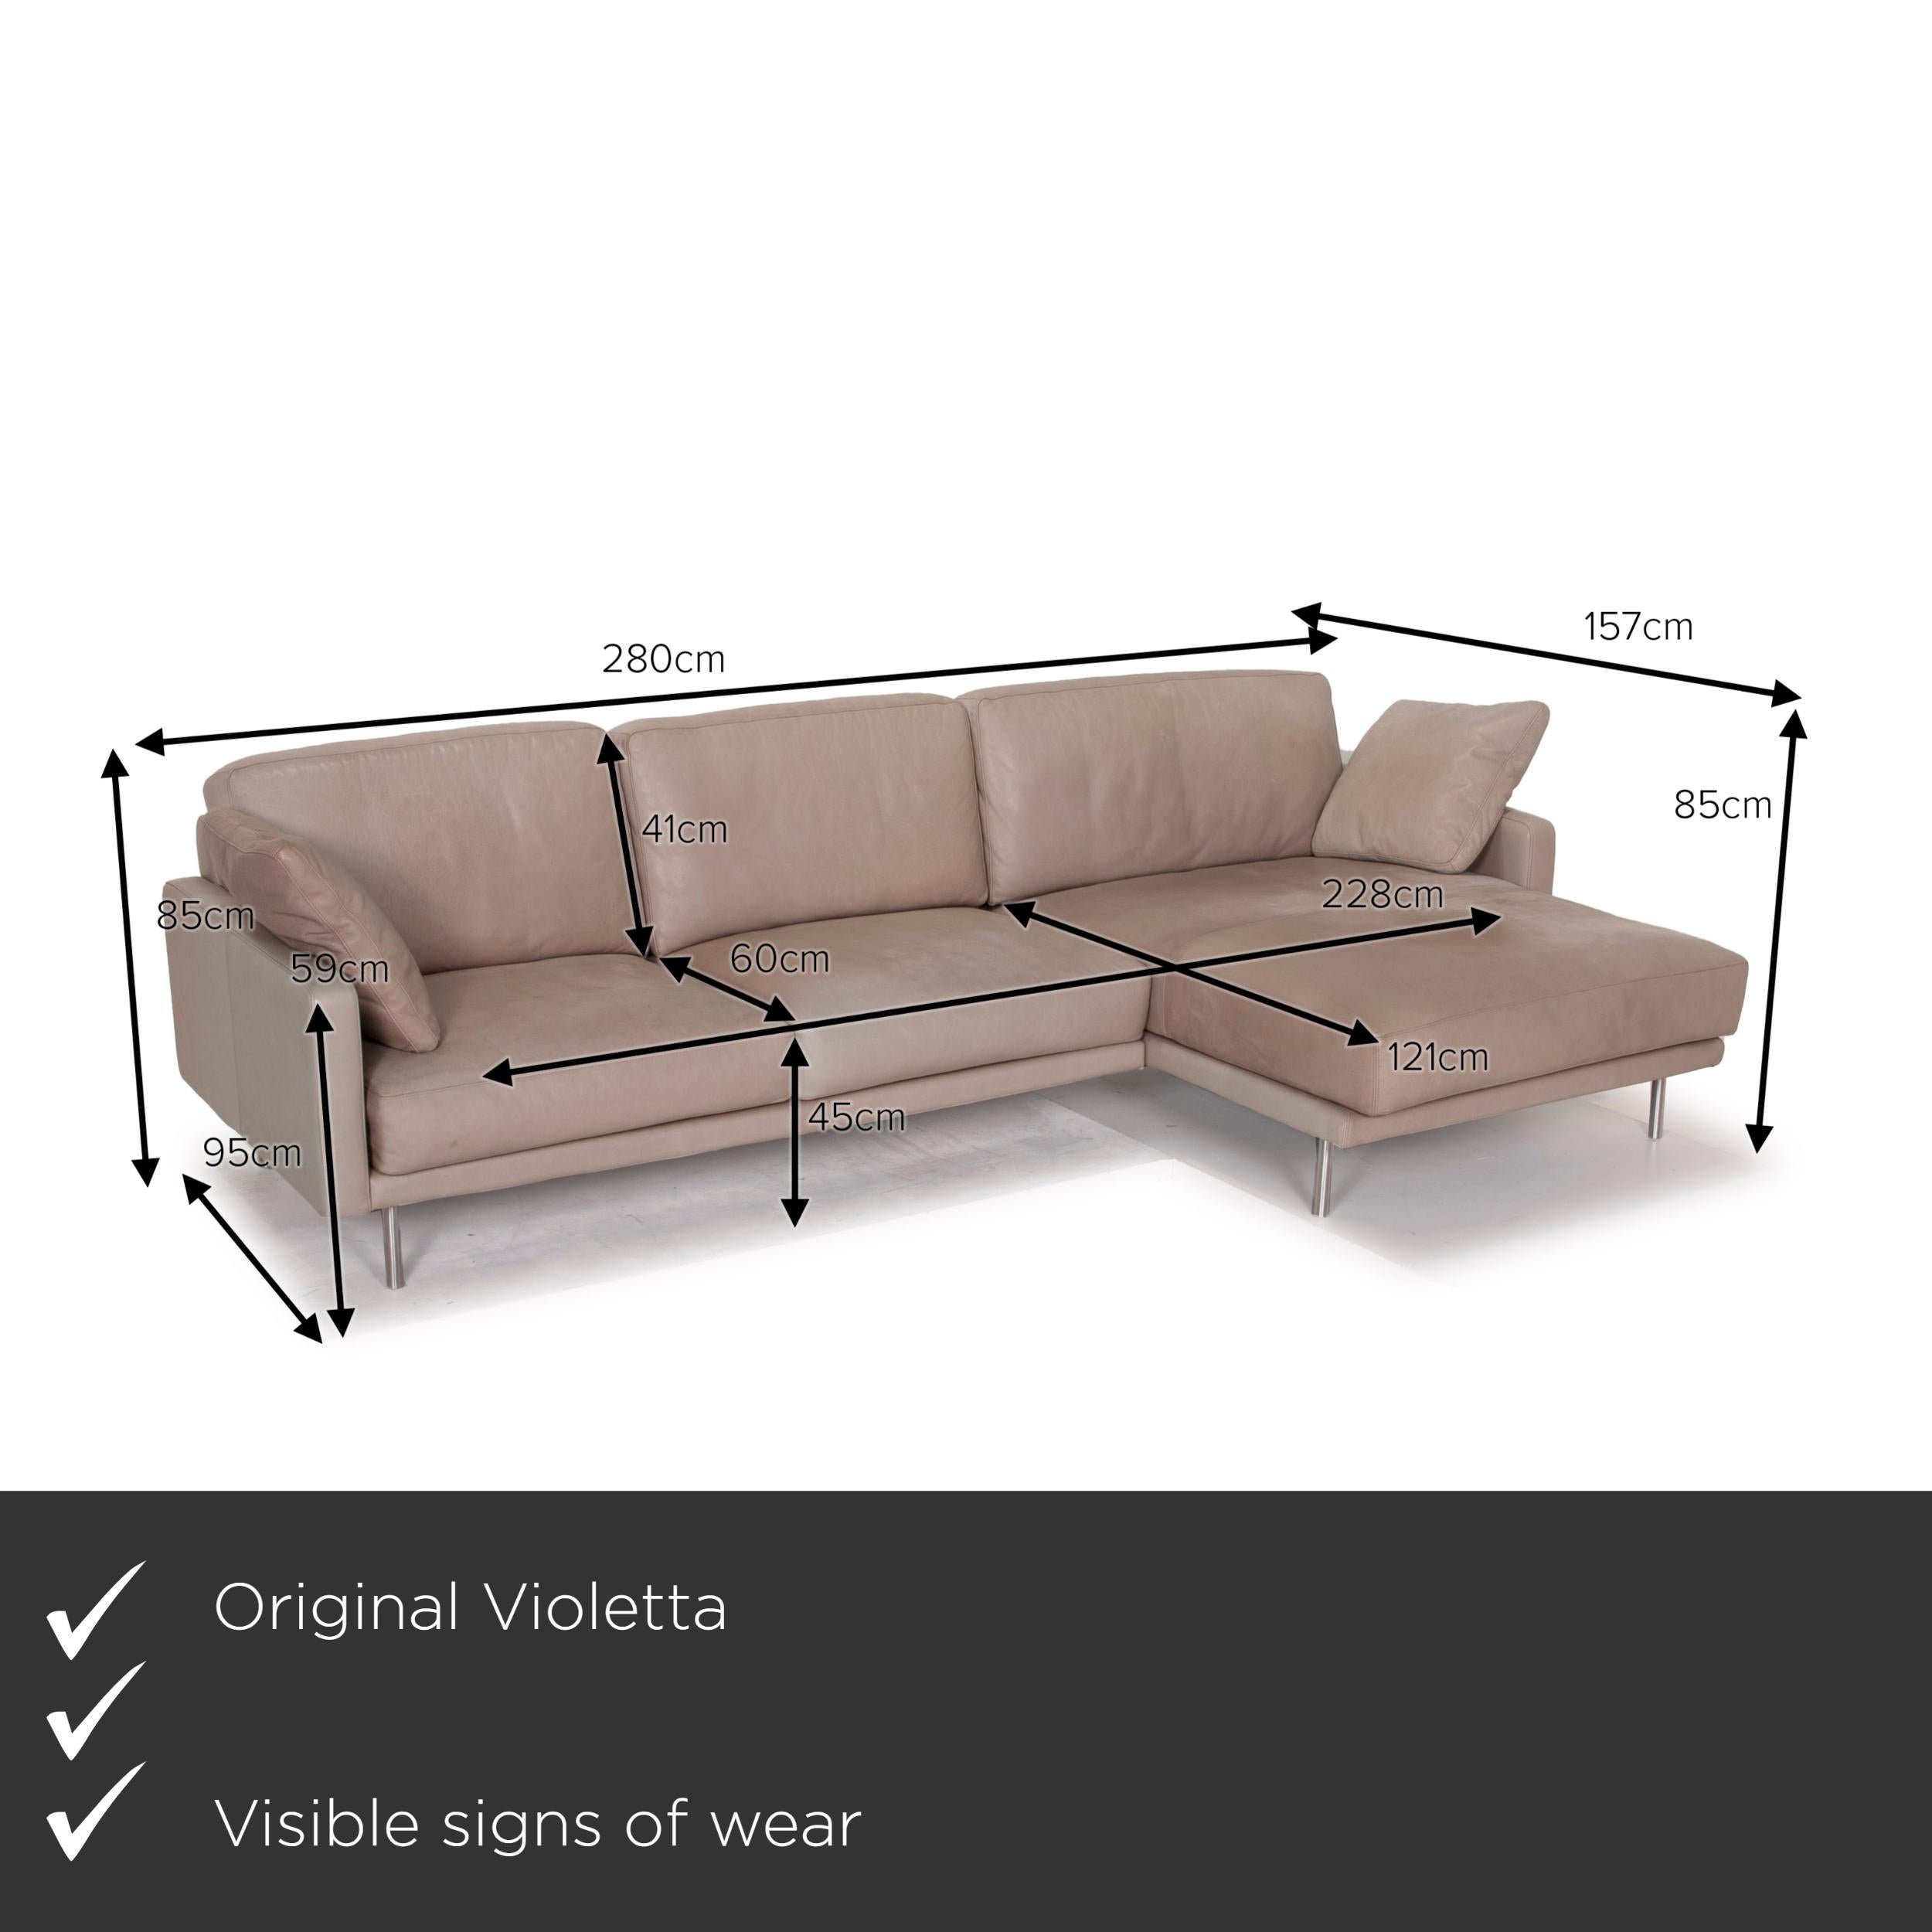 We present to you a Violetta leather sofa cognac corner sofa.

Product measurements in centimeters:

Depth 95
Width 280
Height 85
Seat height 45
Rest height 59
Seat depth 60
Seat width 228
Back height 41.
 
 
   